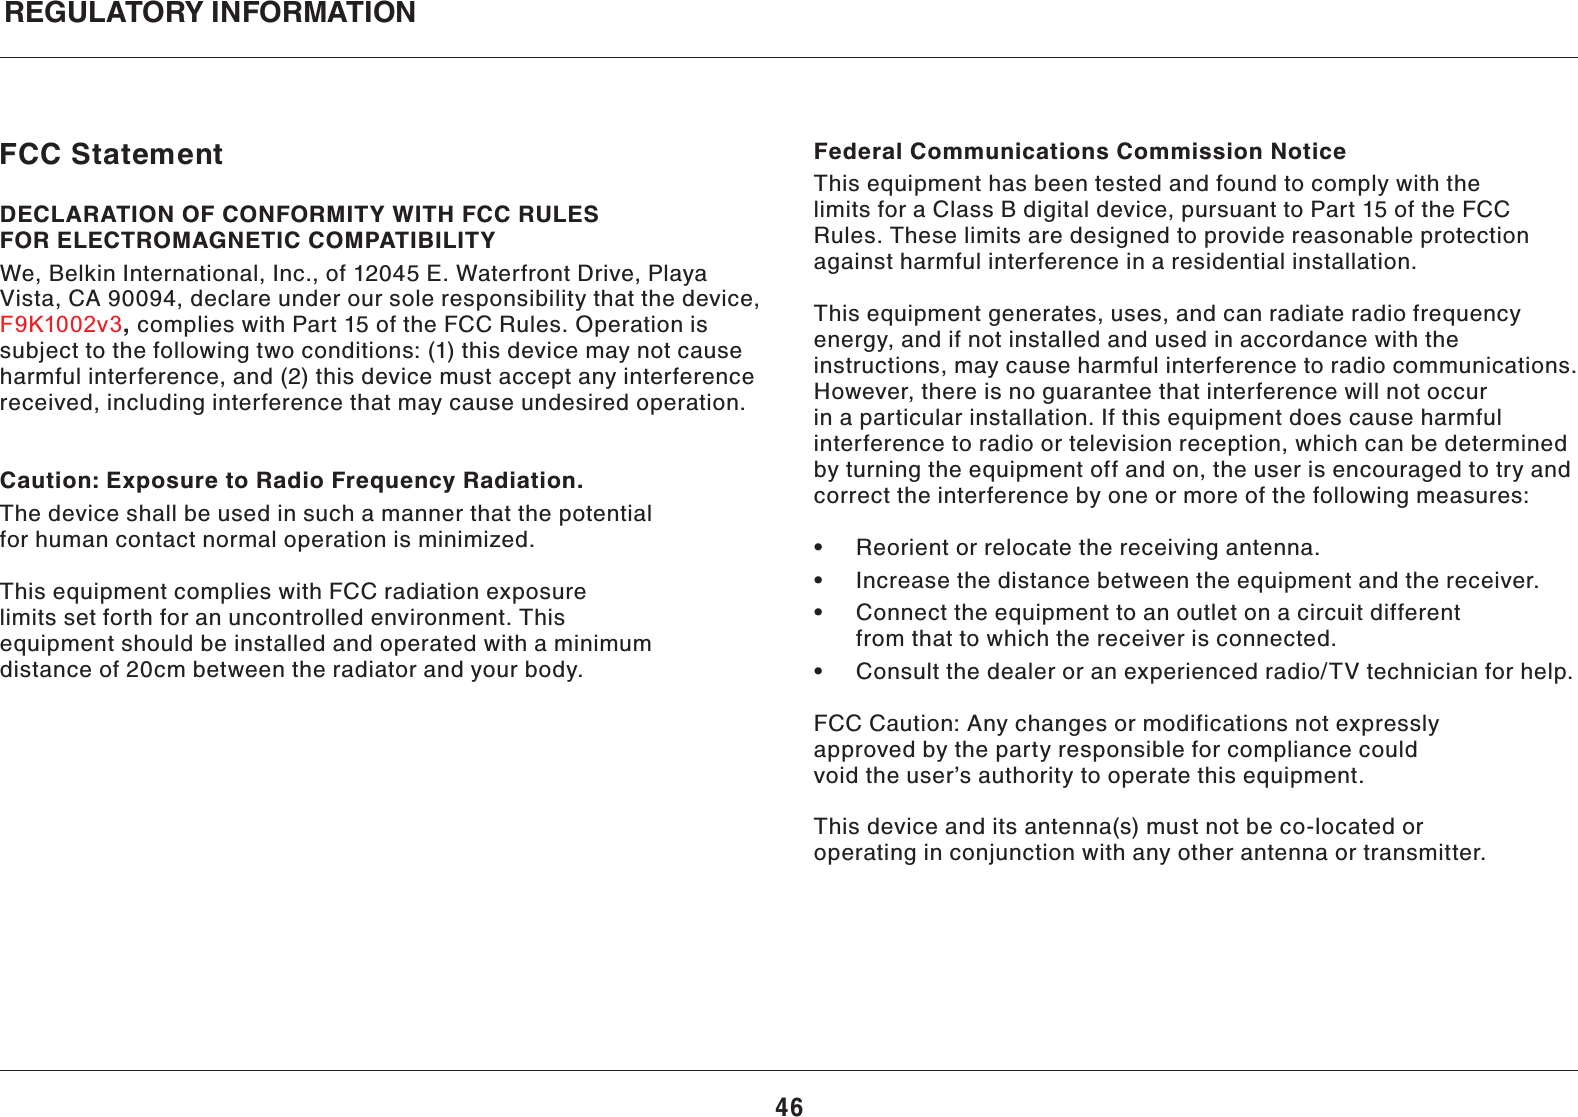 46REGULATORY INFORMATIONFCC StatementDECLARATION OF CONFORMITY WITH FCC RULES FOR ELECTROMAGNETIC COMPATIBILITYWe, Belkin International, Inc., of 12045 E. Waterfront Drive, Playa Vista, CA 90094, declare under our sole responsibility that the device, , complies with Part 15 of the FCC Rules. Operation is subject to the following two conditions: (1) this device may not cause harmful interference, and (2) this device must accept any interference received, including interference that may cause undesired operation.  Caution: Exposure to Radio Frequency Radiation.The device shall be used in such a manner that the potential for human contact normal operation is minimized.This equipment complies with FCC radiation exposure limits set forth for an uncontrolled environment. This equipment should be installed and operated with a minimum distance of 20cm between the radiator and your body.Federal Communications Commission NoticeThis equipment has been tested and found to comply with the limits for a Class B digital device, pursuant to Part 15 of the FCC Rules. These limits are designed to provide reasonable protection against harmful interference in a residential installation.This equipment generates, uses, and can radiate radio frequency energy, and if not installed and used in accordance with the instructions, may cause harmful interference to radio communications. However, there is no guarantee that interference will not occur in a particular installation. If this equipment does cause harmful interference to radio or television reception, which can be determined by turning the equipment off and on, the user is encouraged to try and correct the interference by one or more of the following measures:   from that to which the receiver is connected.  &quot; FCC Caution: Any changes or modifications not expressly approved by the party responsible for compliance could void the user’s authority to operate this equipment.This device and its antenna(s) must not be co-located or operating in conjunction with any other antenna or transmitter.